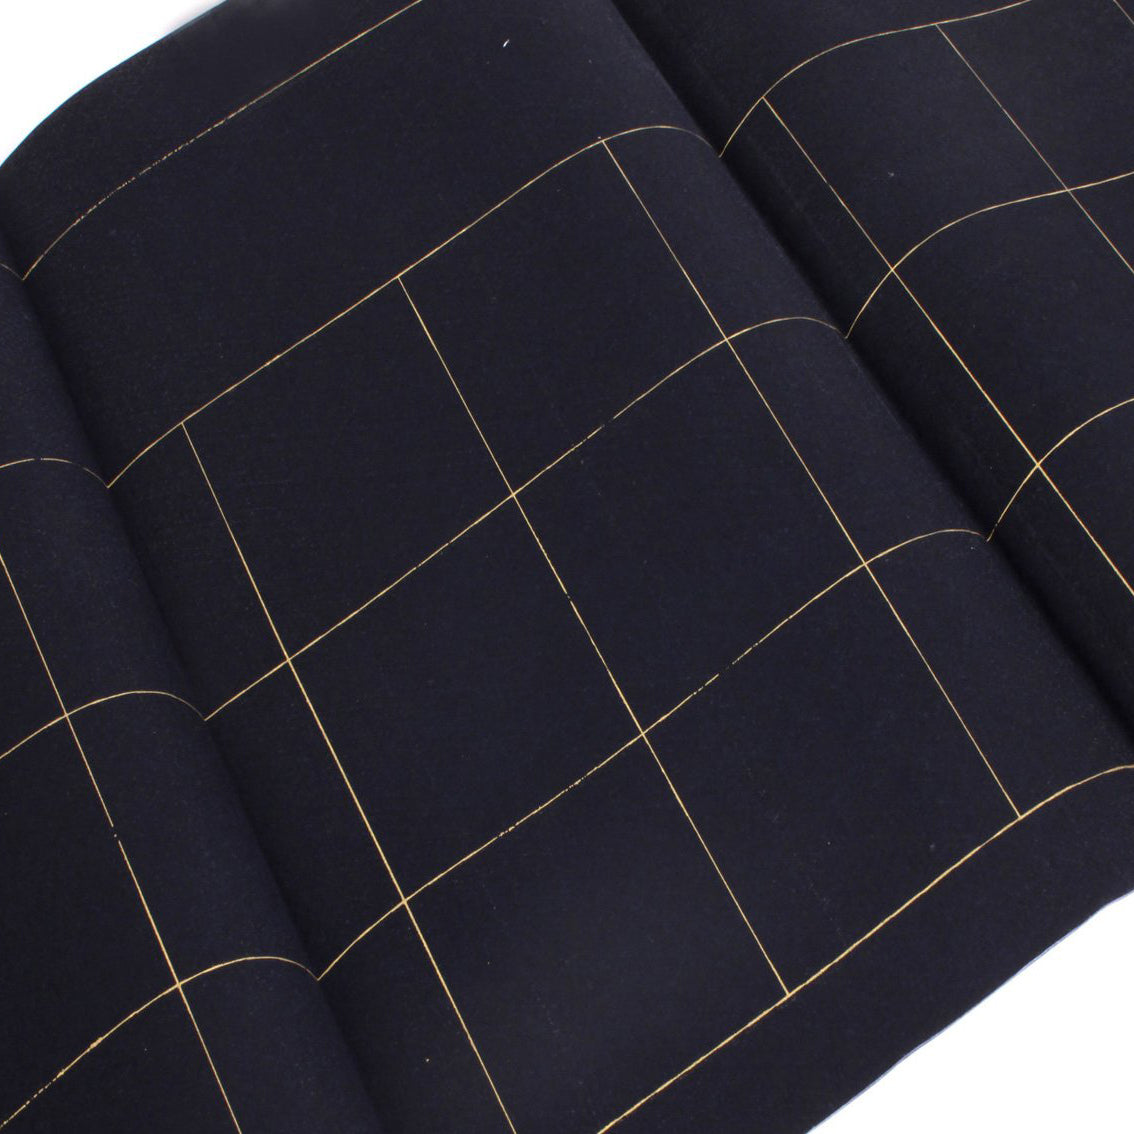 the ink that brings the best effect of the "Black Knight" - Black Gold-Grid Decorative Shuen Paper